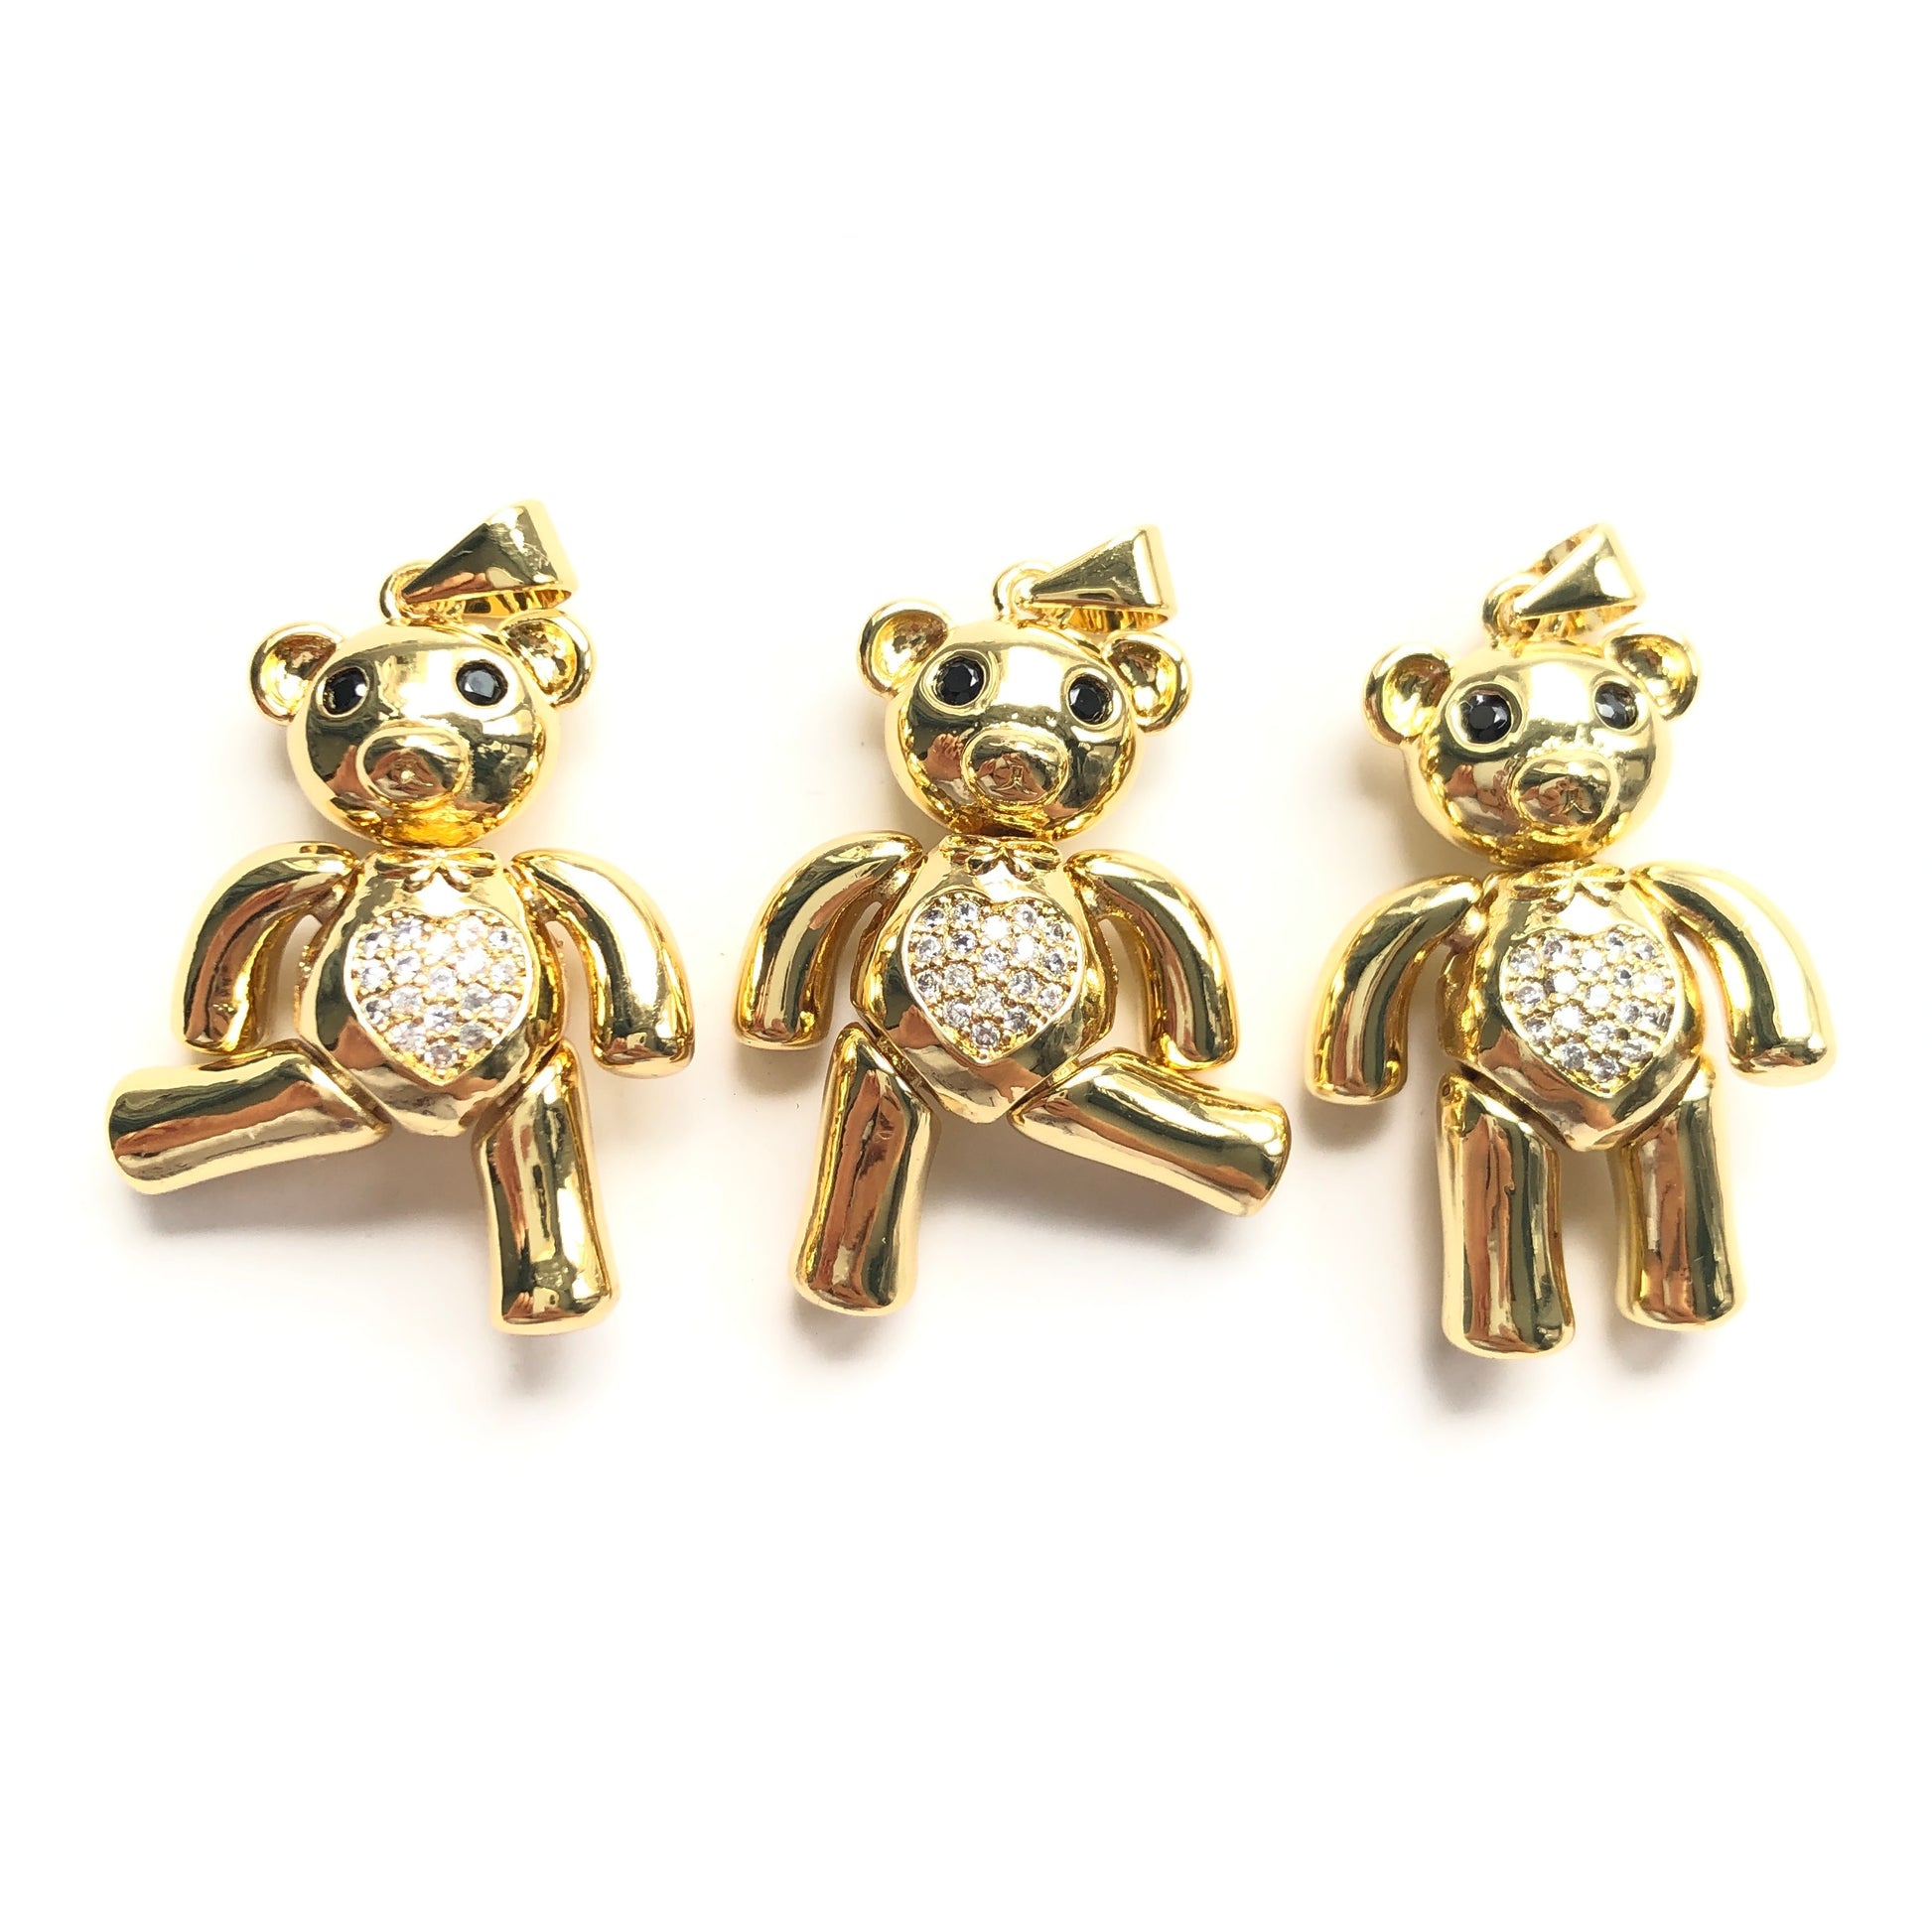 5-10pcs/lot CZ Paved Movable Cute Heart Bear Charms CZ Paved Charms Animals & Insects New Charms Arrivals Charms Beads Beyond